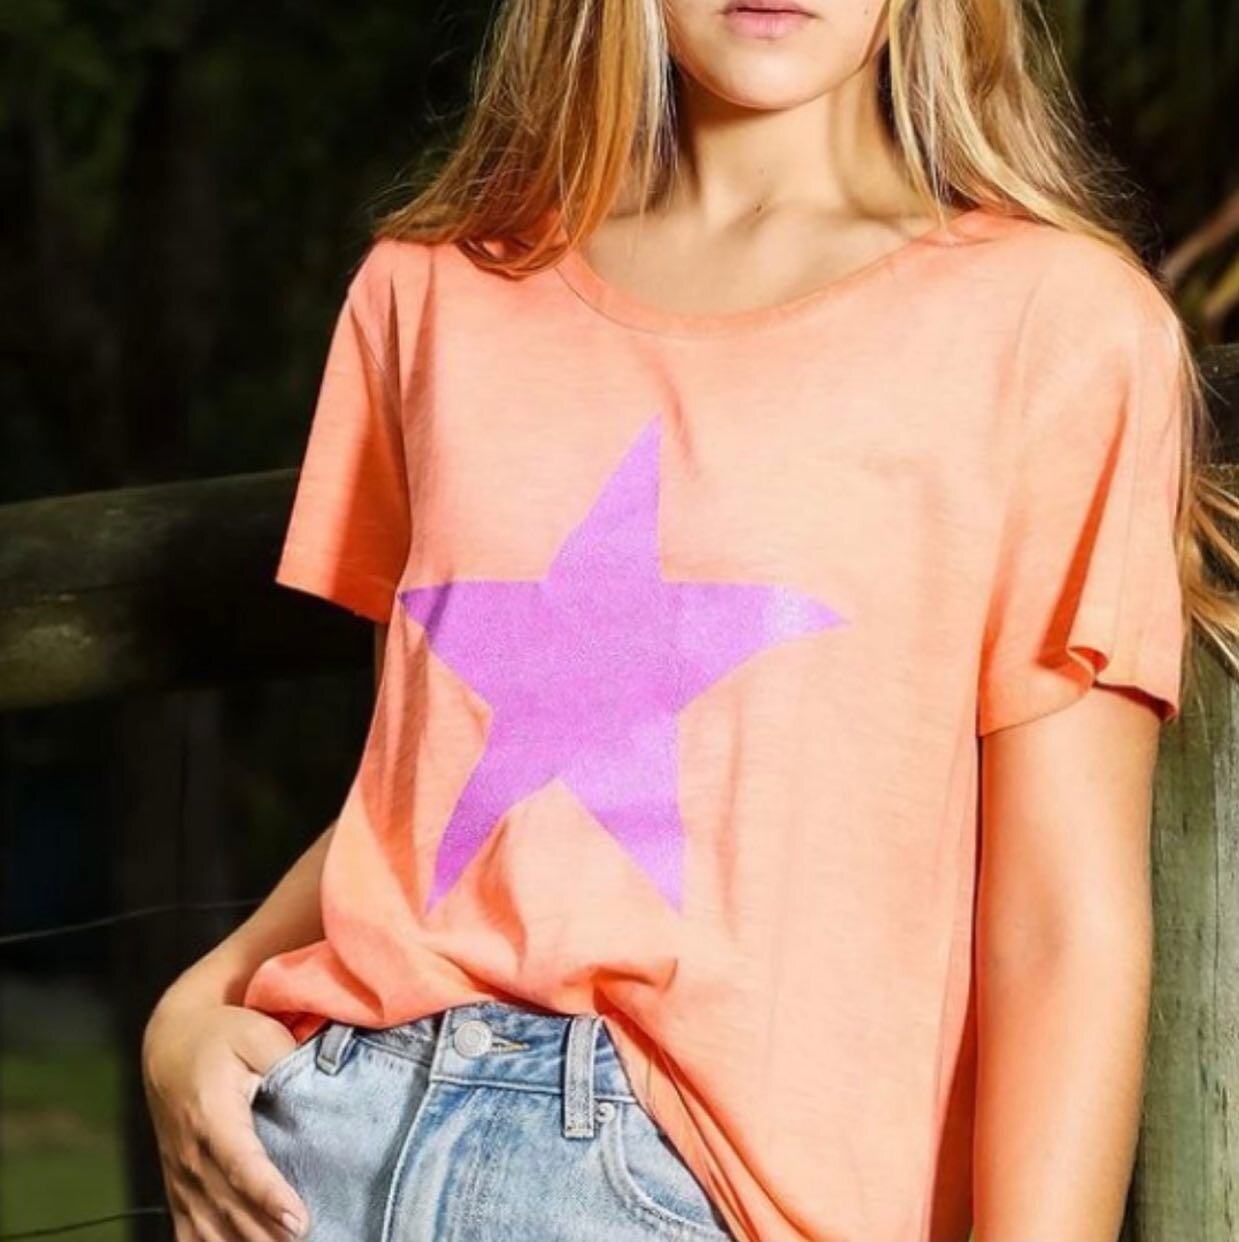 Get your stardust on✨
Fun Tees are in stock now.
.
.
.
#stardustcrew #cotton #glitter 
#shine #tees #stockservice 
#boutique #fashion #cotton